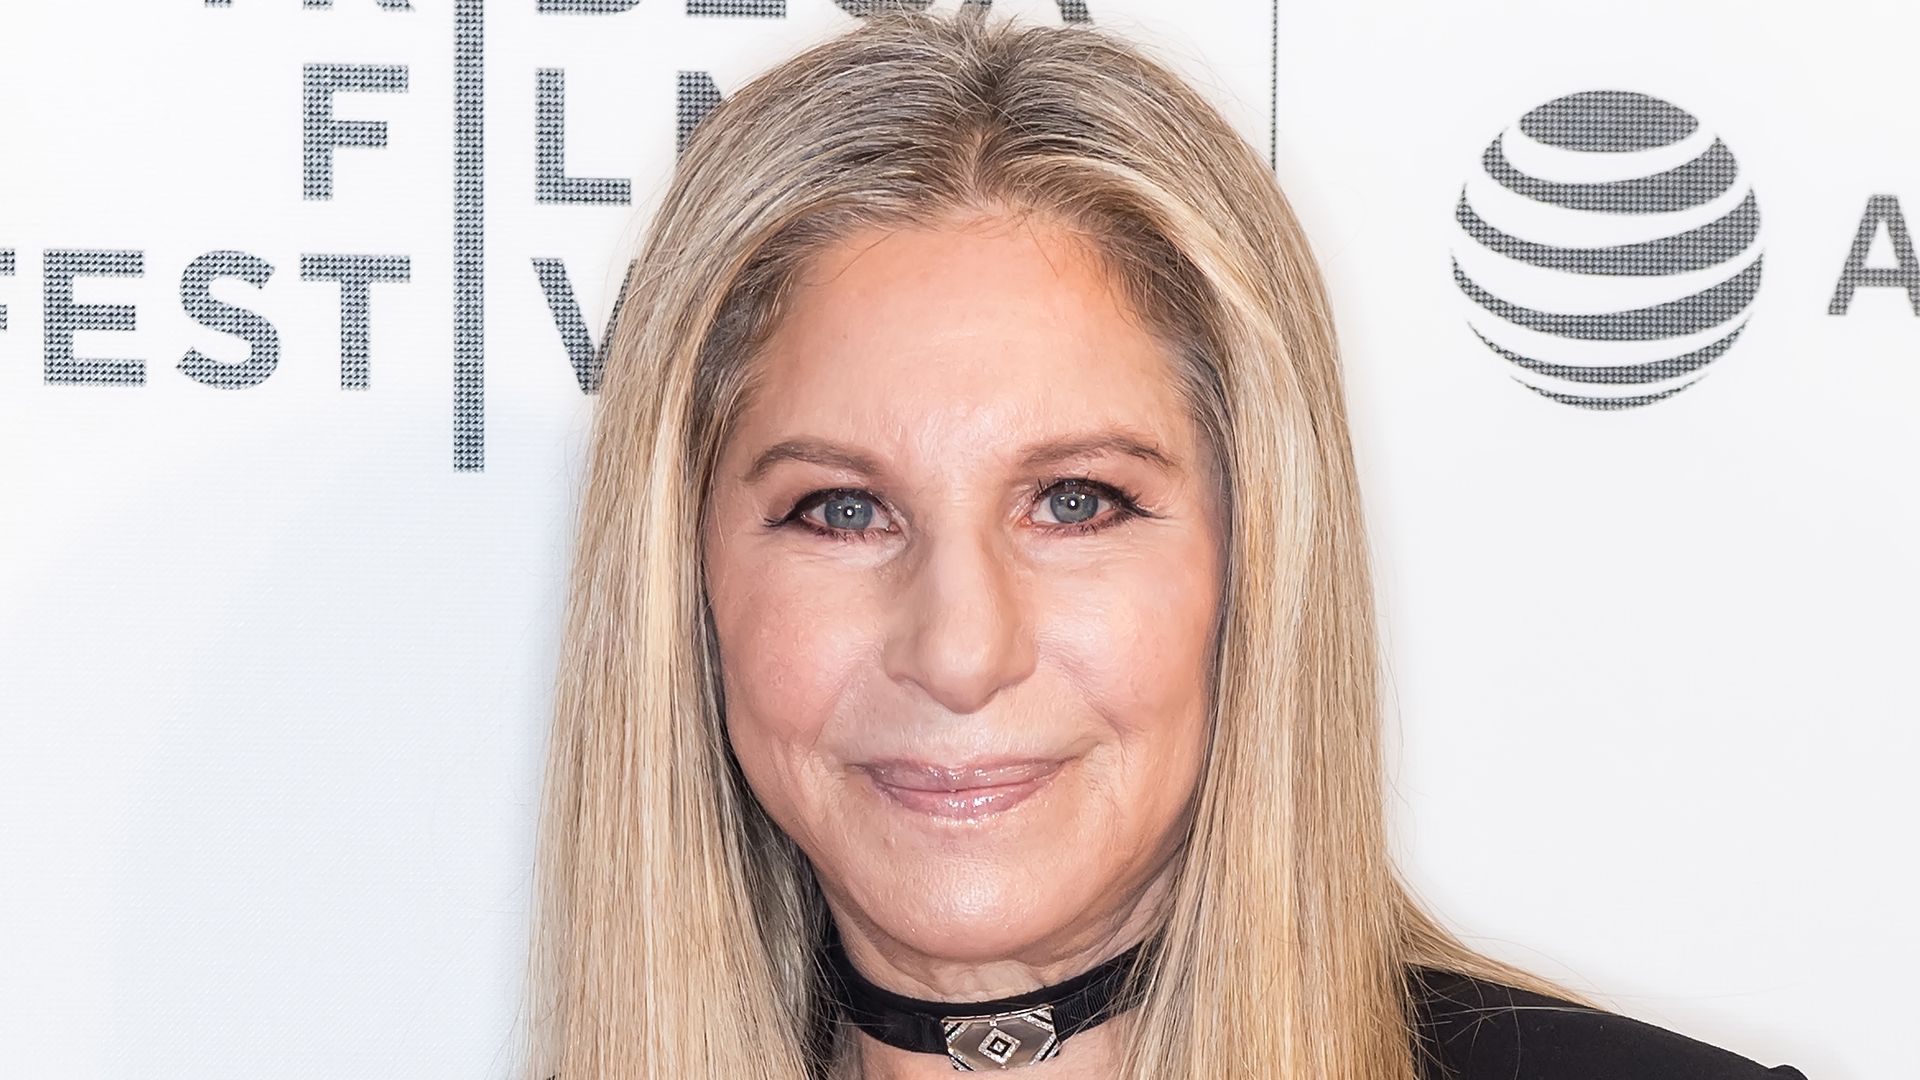 Barbra Streisand shocks fans as she grills Melissa McCarthy about Ozempic use after 75 lbs weight loss